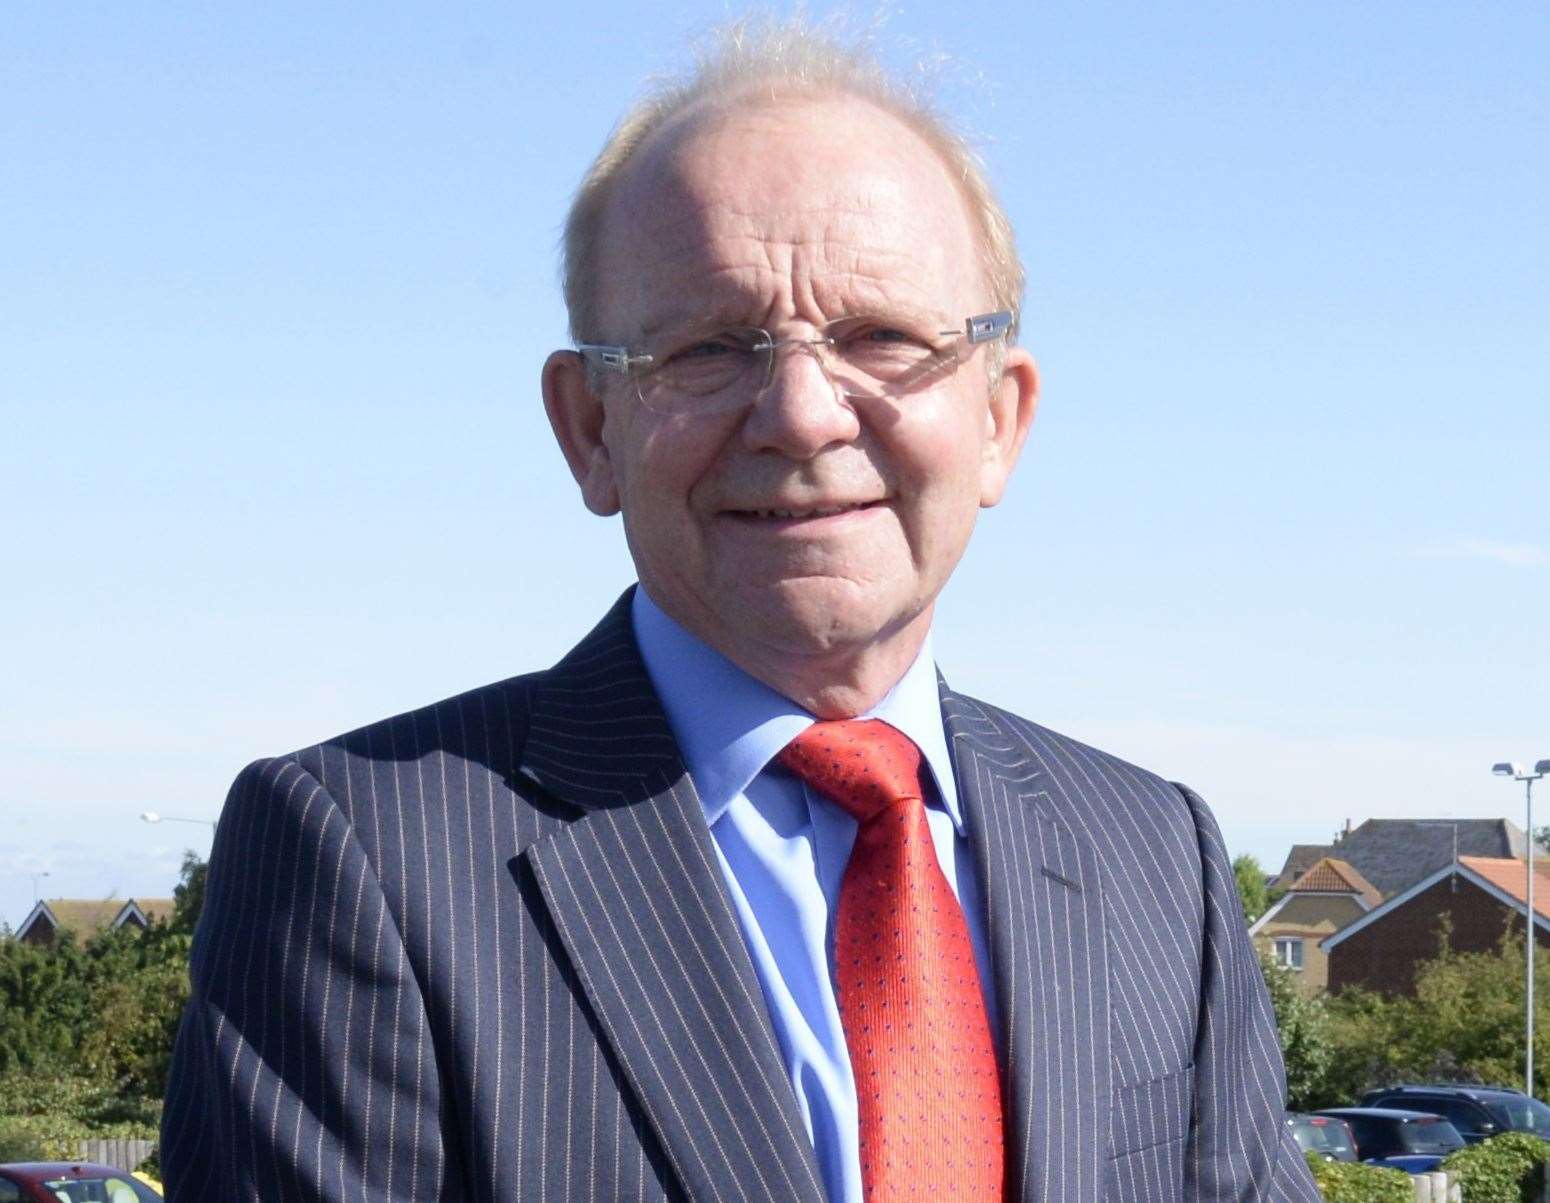 Dr John Ribchester raised concerns during the meeting about new housing in Whitstable